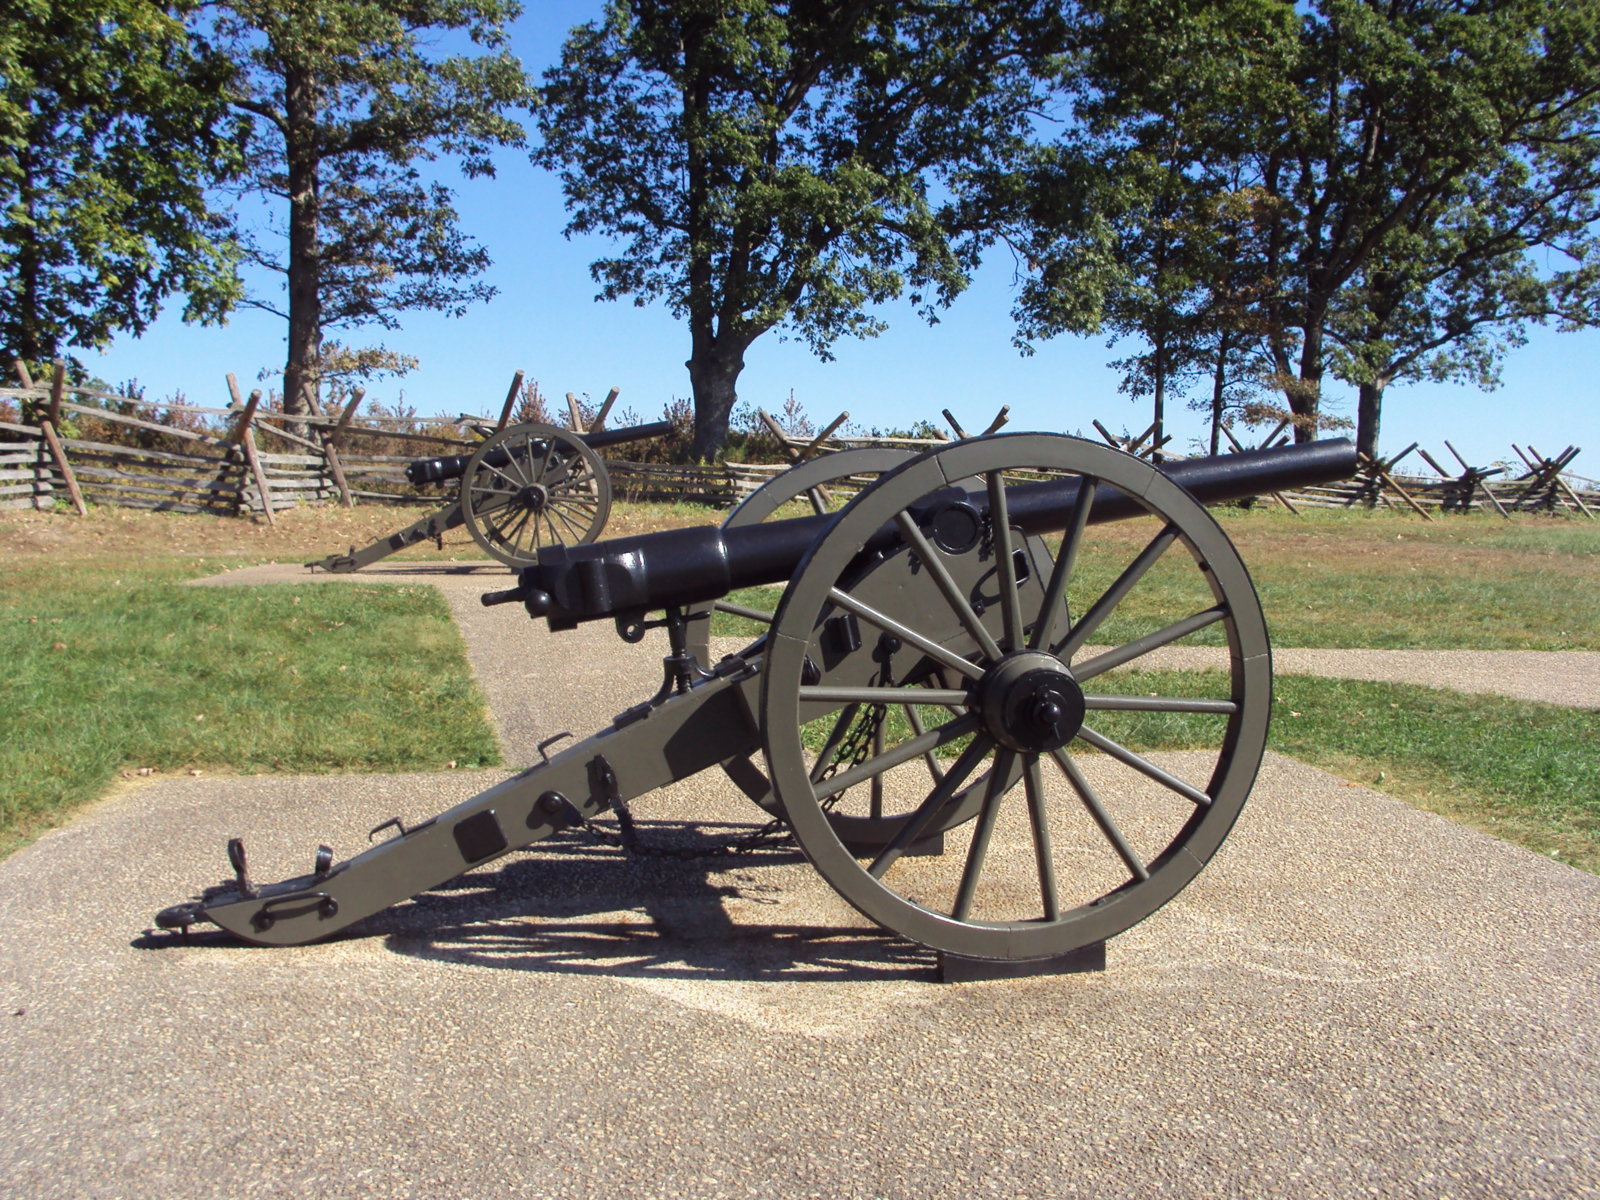 Confederate Whitworth Rifled Cannon at Gettysburg NMP | American ...